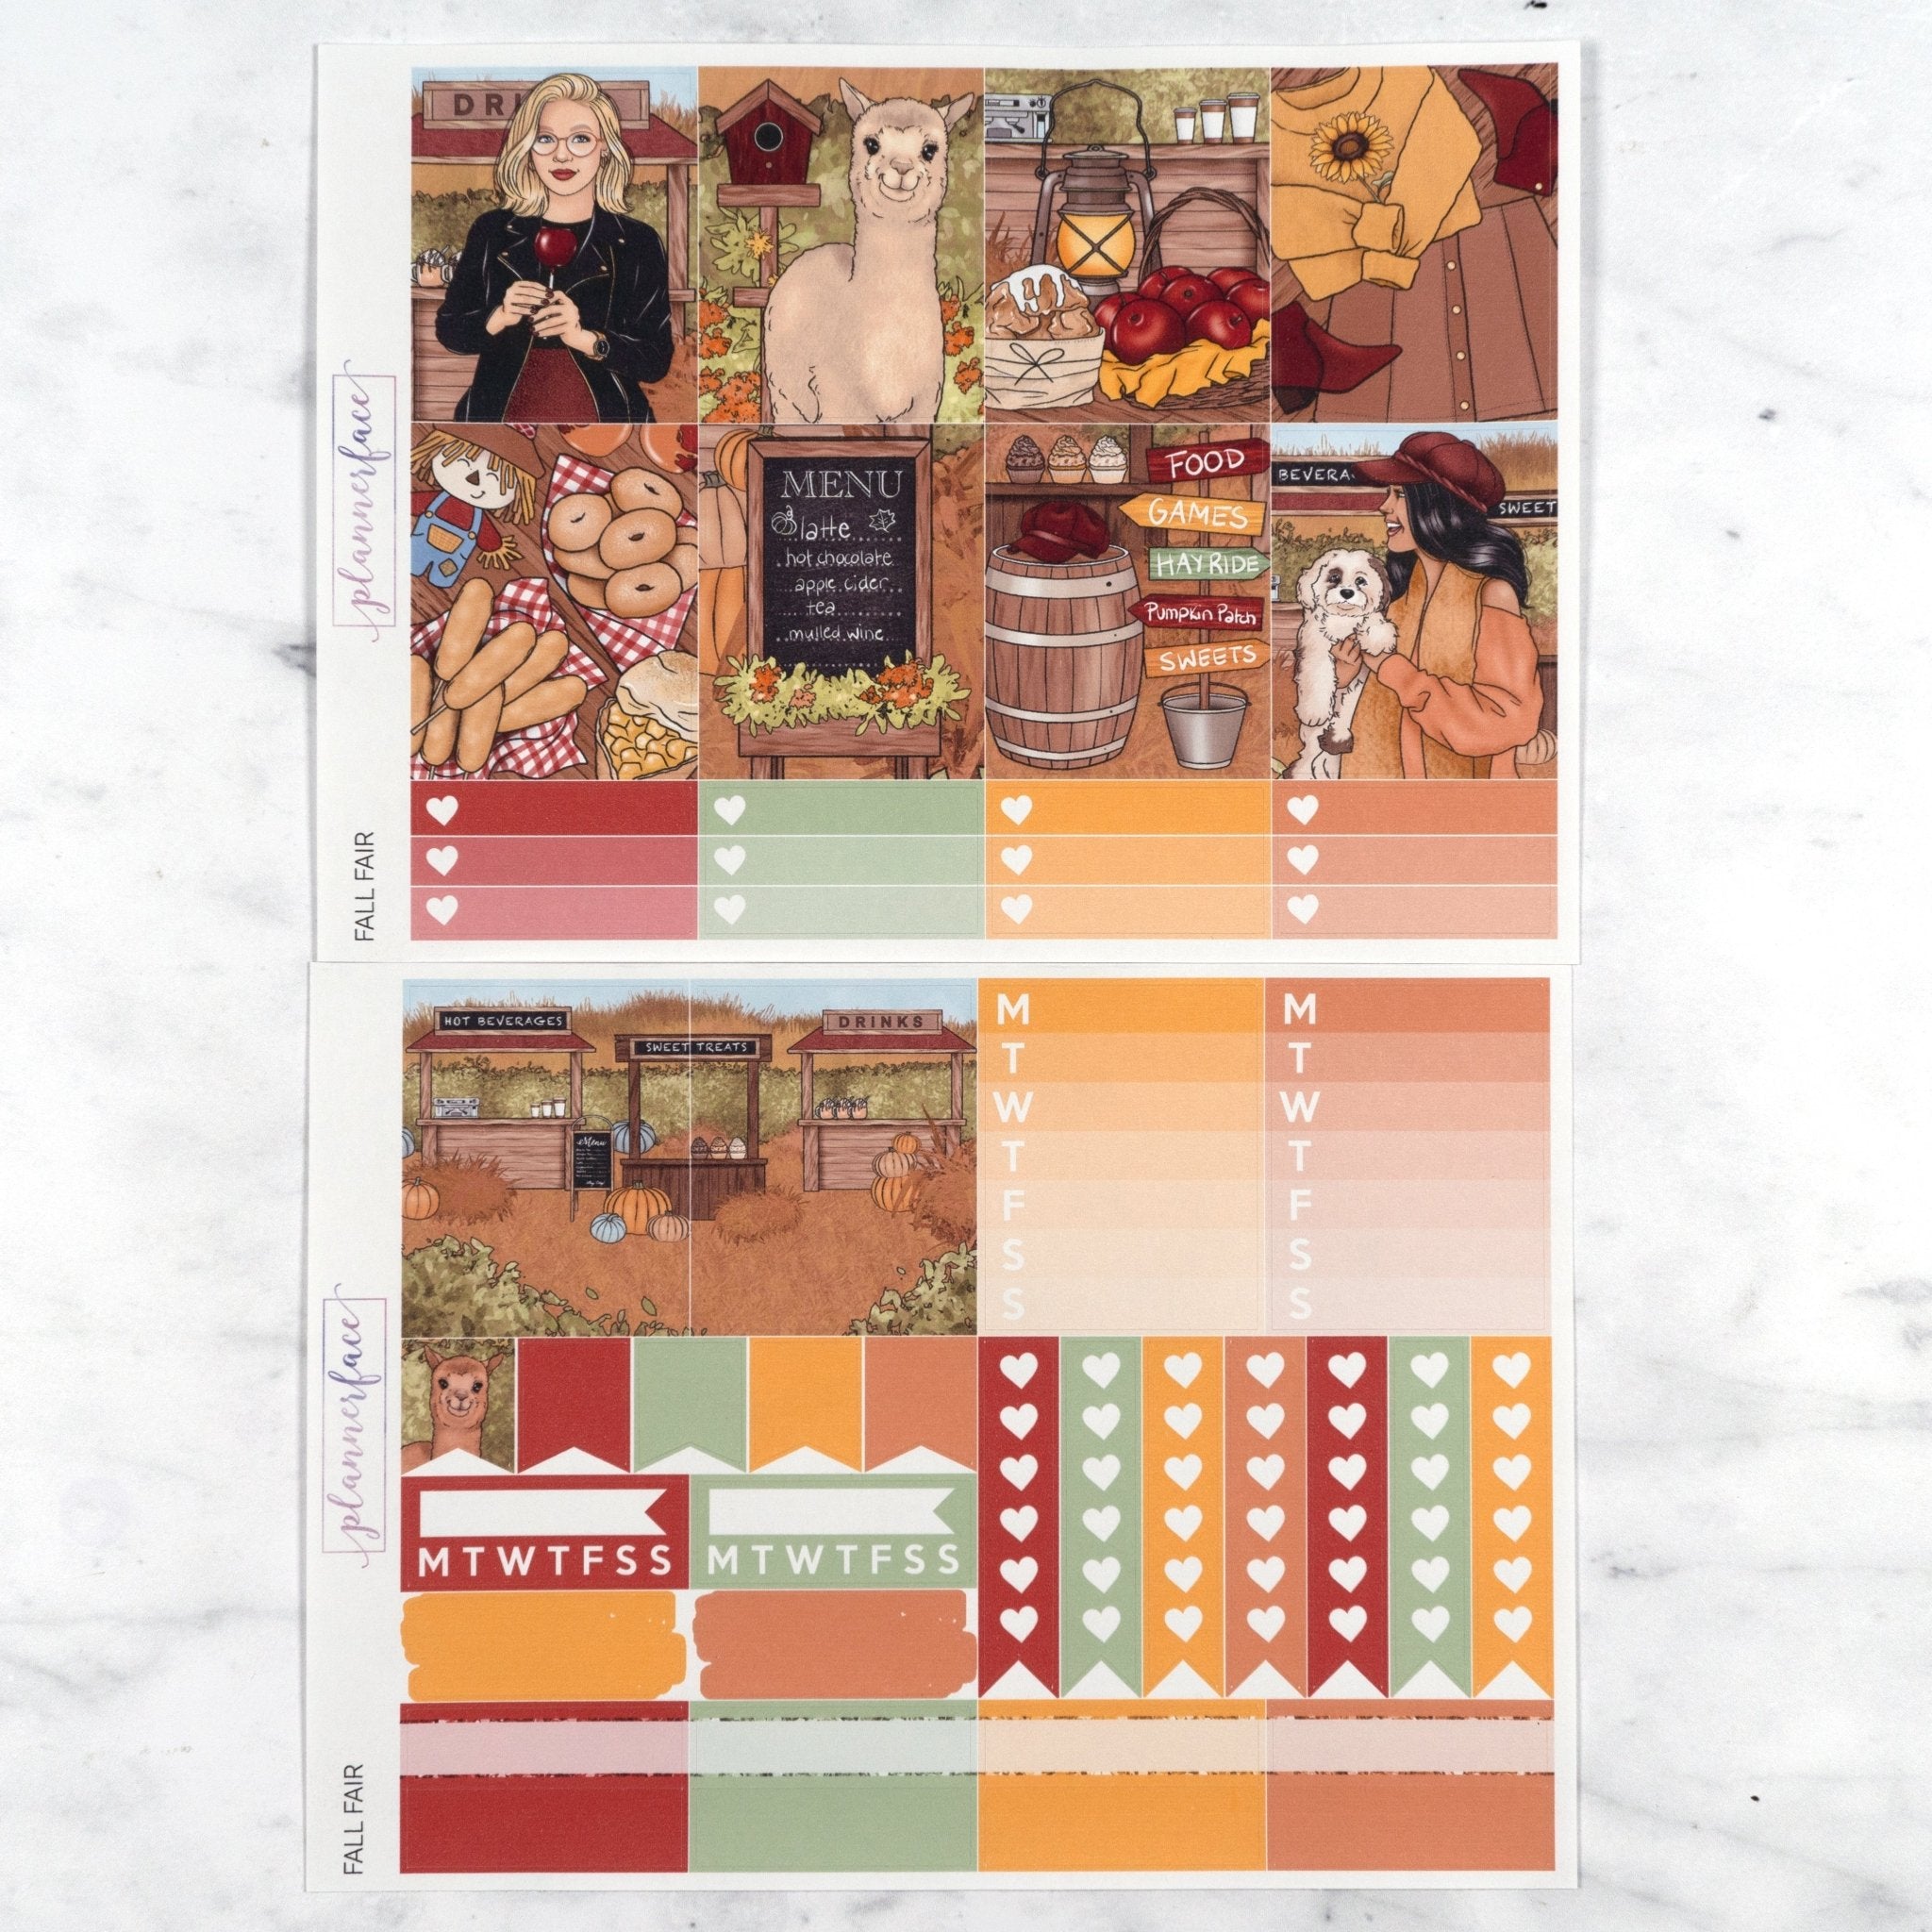 Fall Fair Weekly Kit by Plannerface